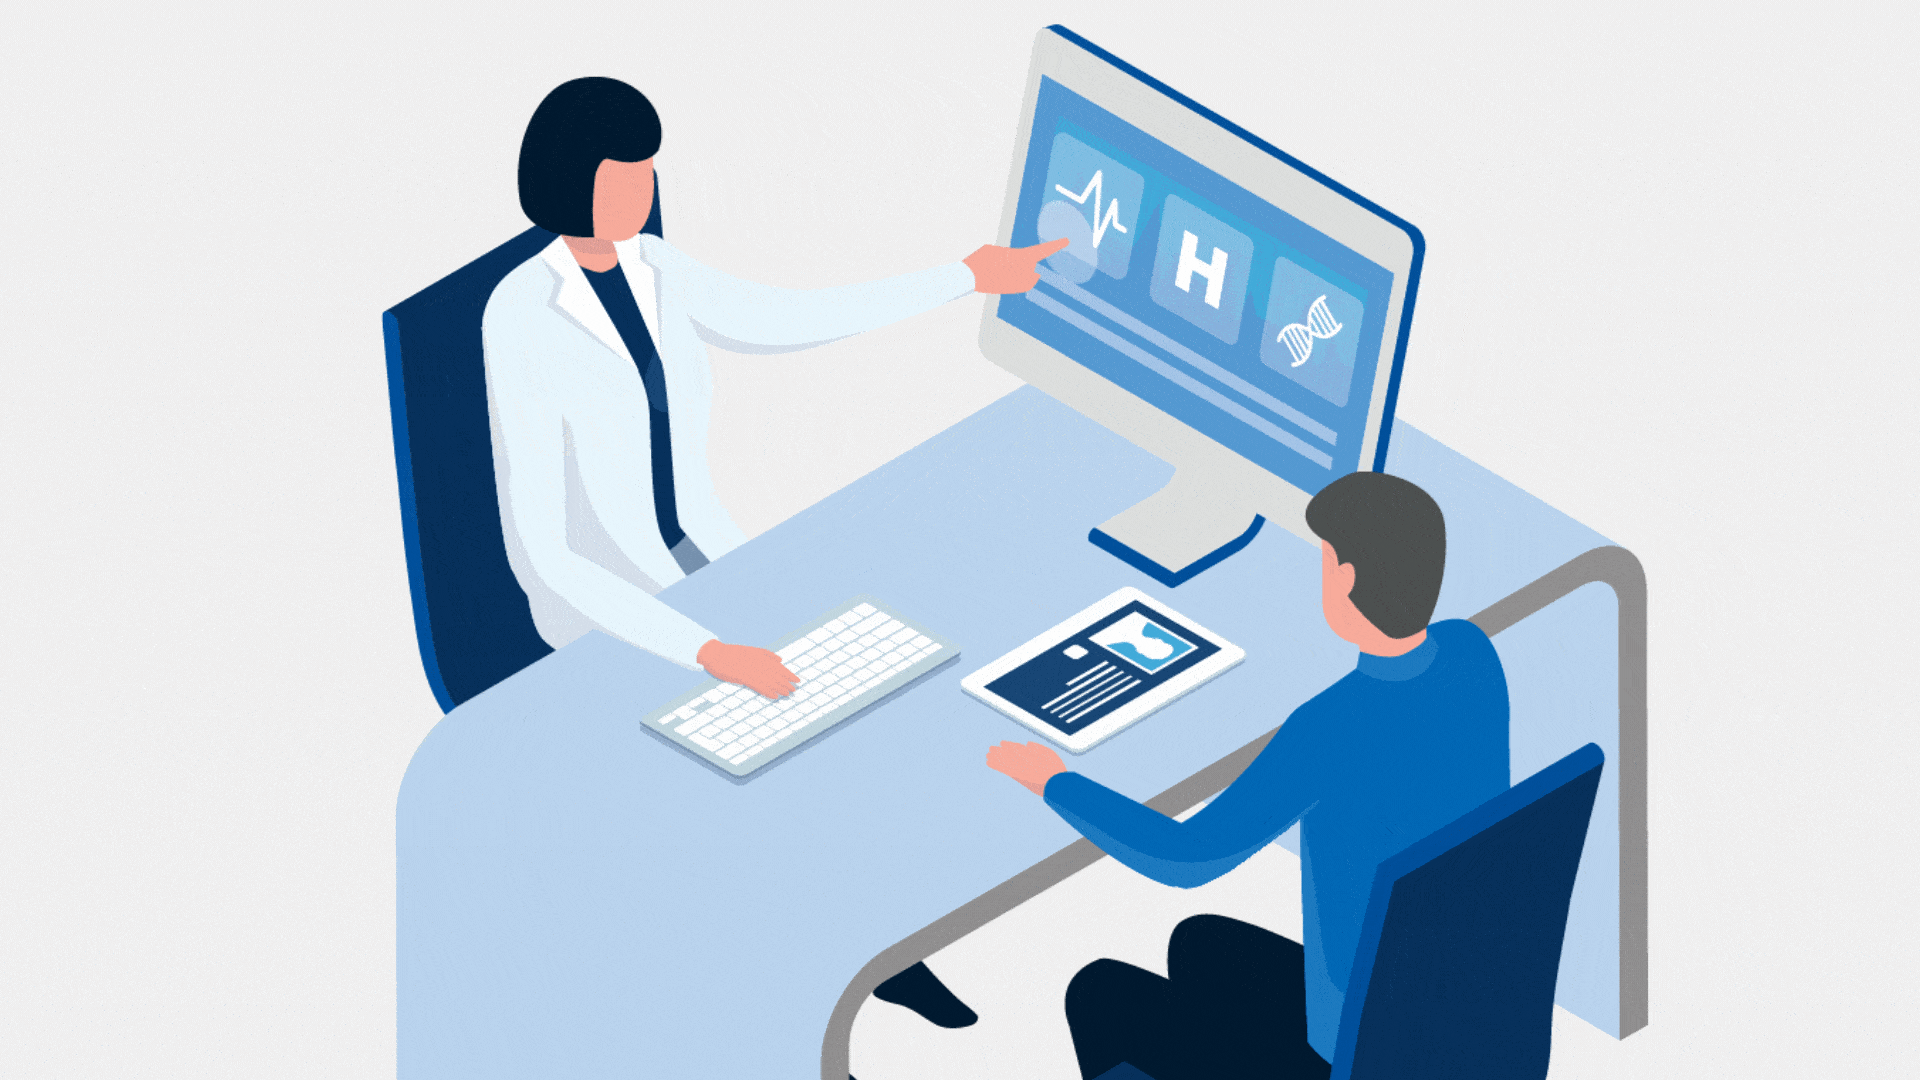 value-based care will continue to grow and become more widely adopted, giving rise to a preventive and predictive healthcare delivery model that harnesses the power of diagnostics